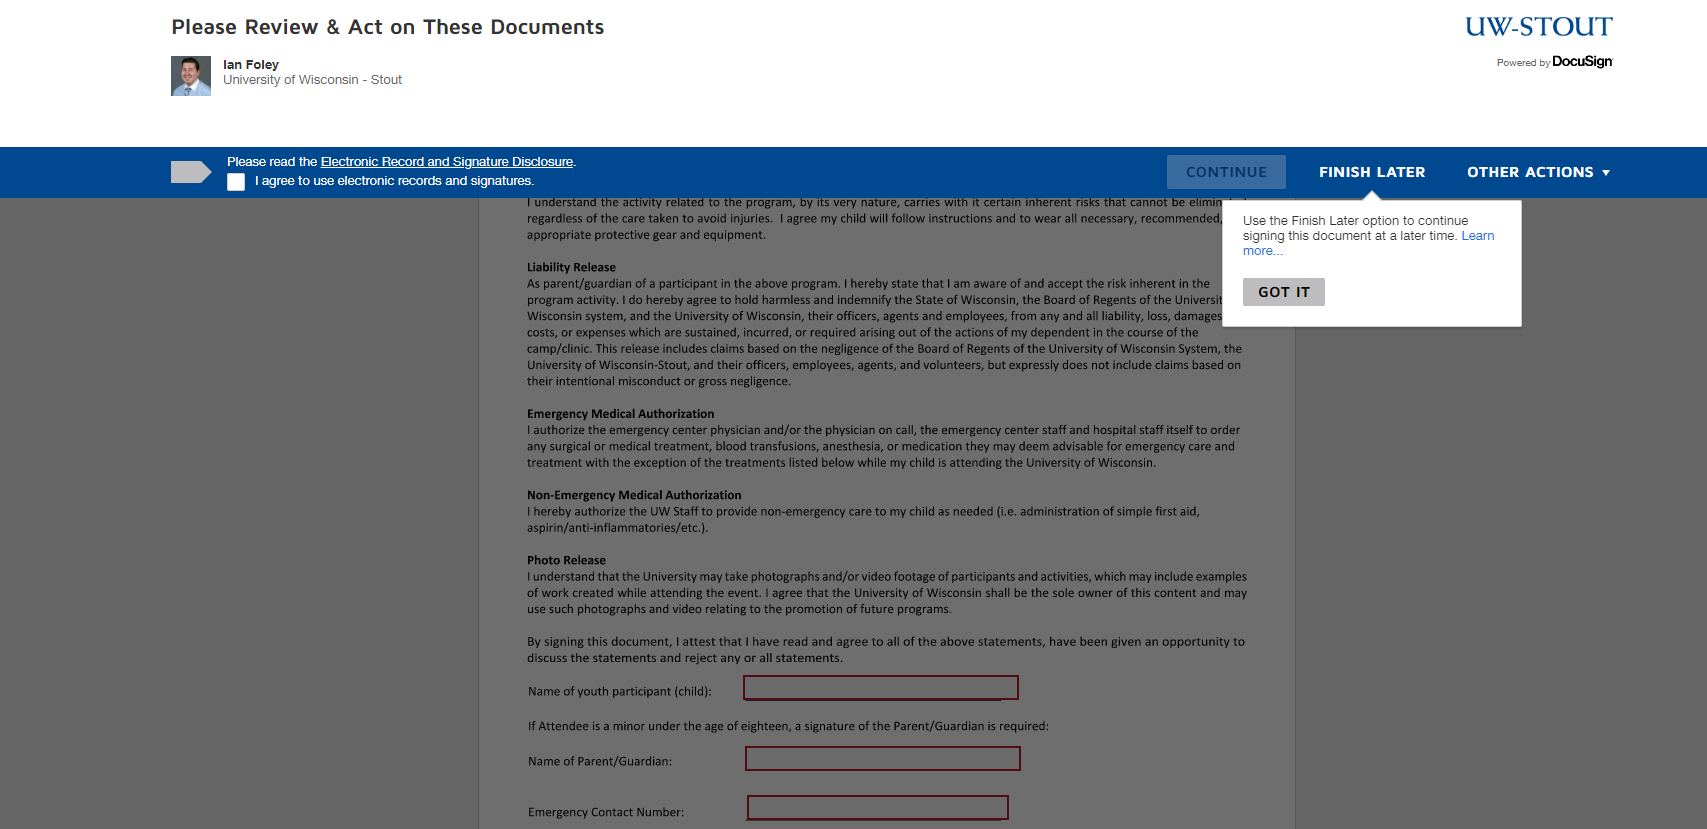 Docusign example of adobe form to sign for parent/guardian permission.